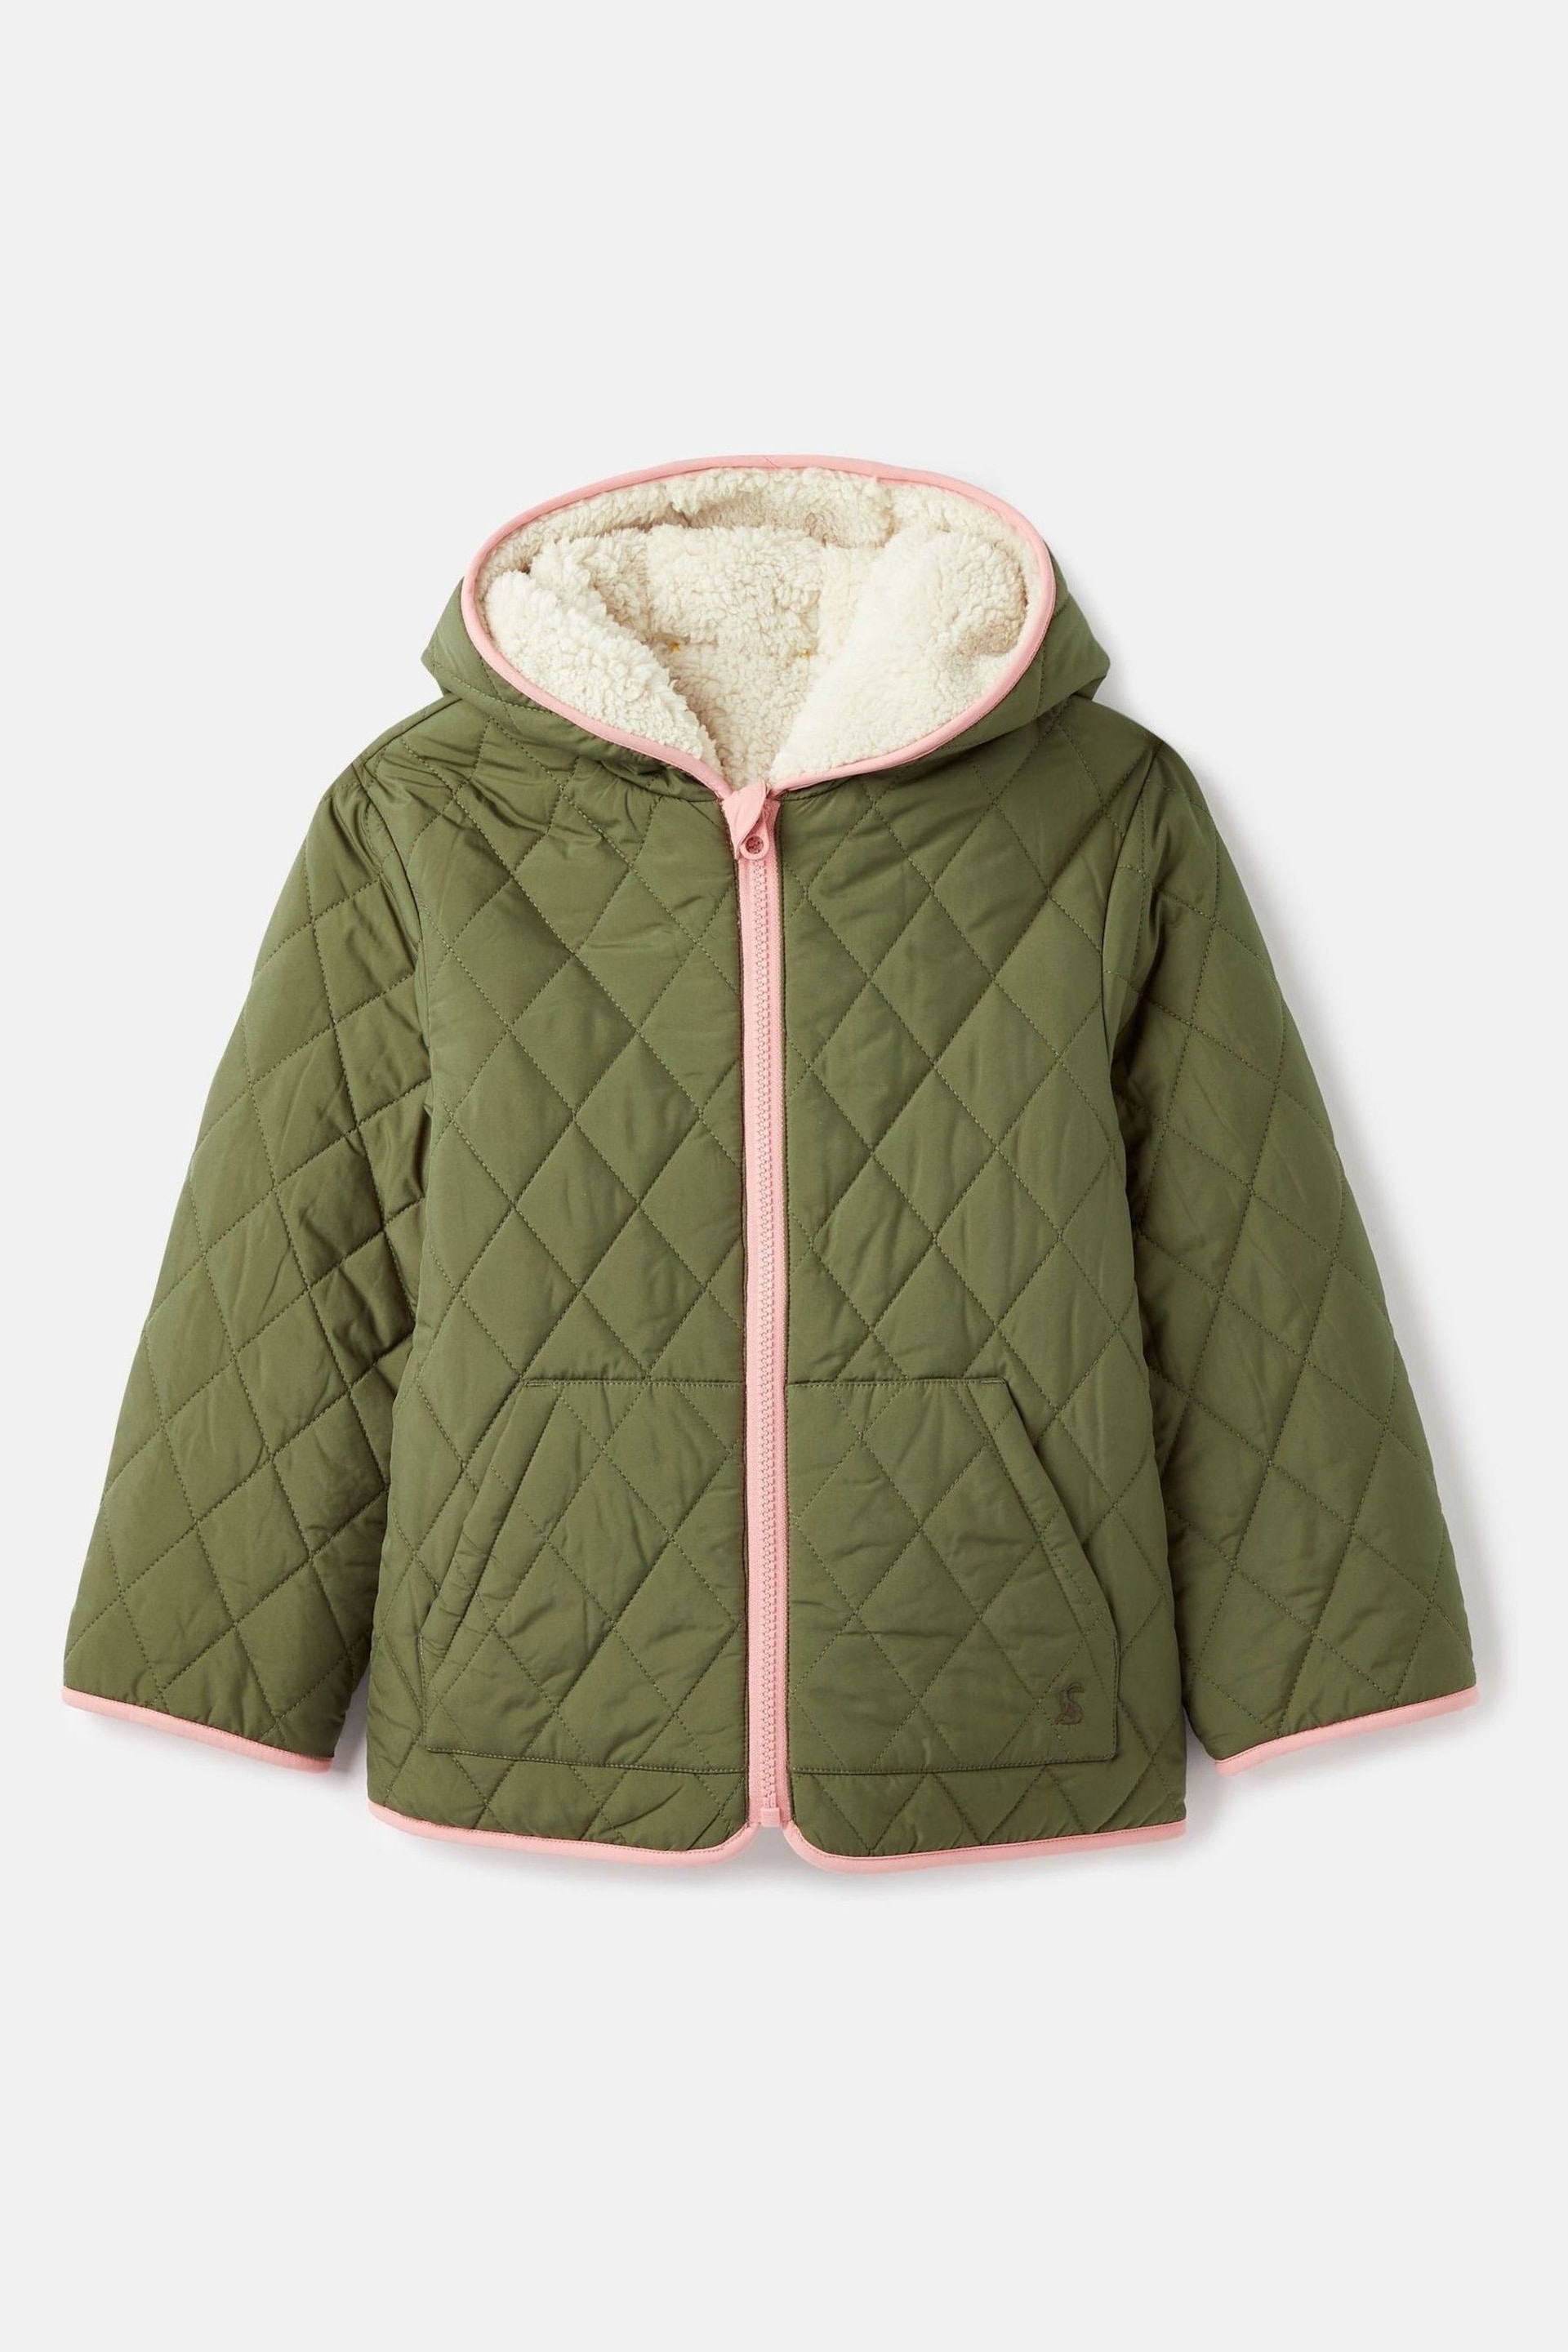 Joules Kali Cream Fleece Lined Reversible Quilted Jacket - Image 5 of 6